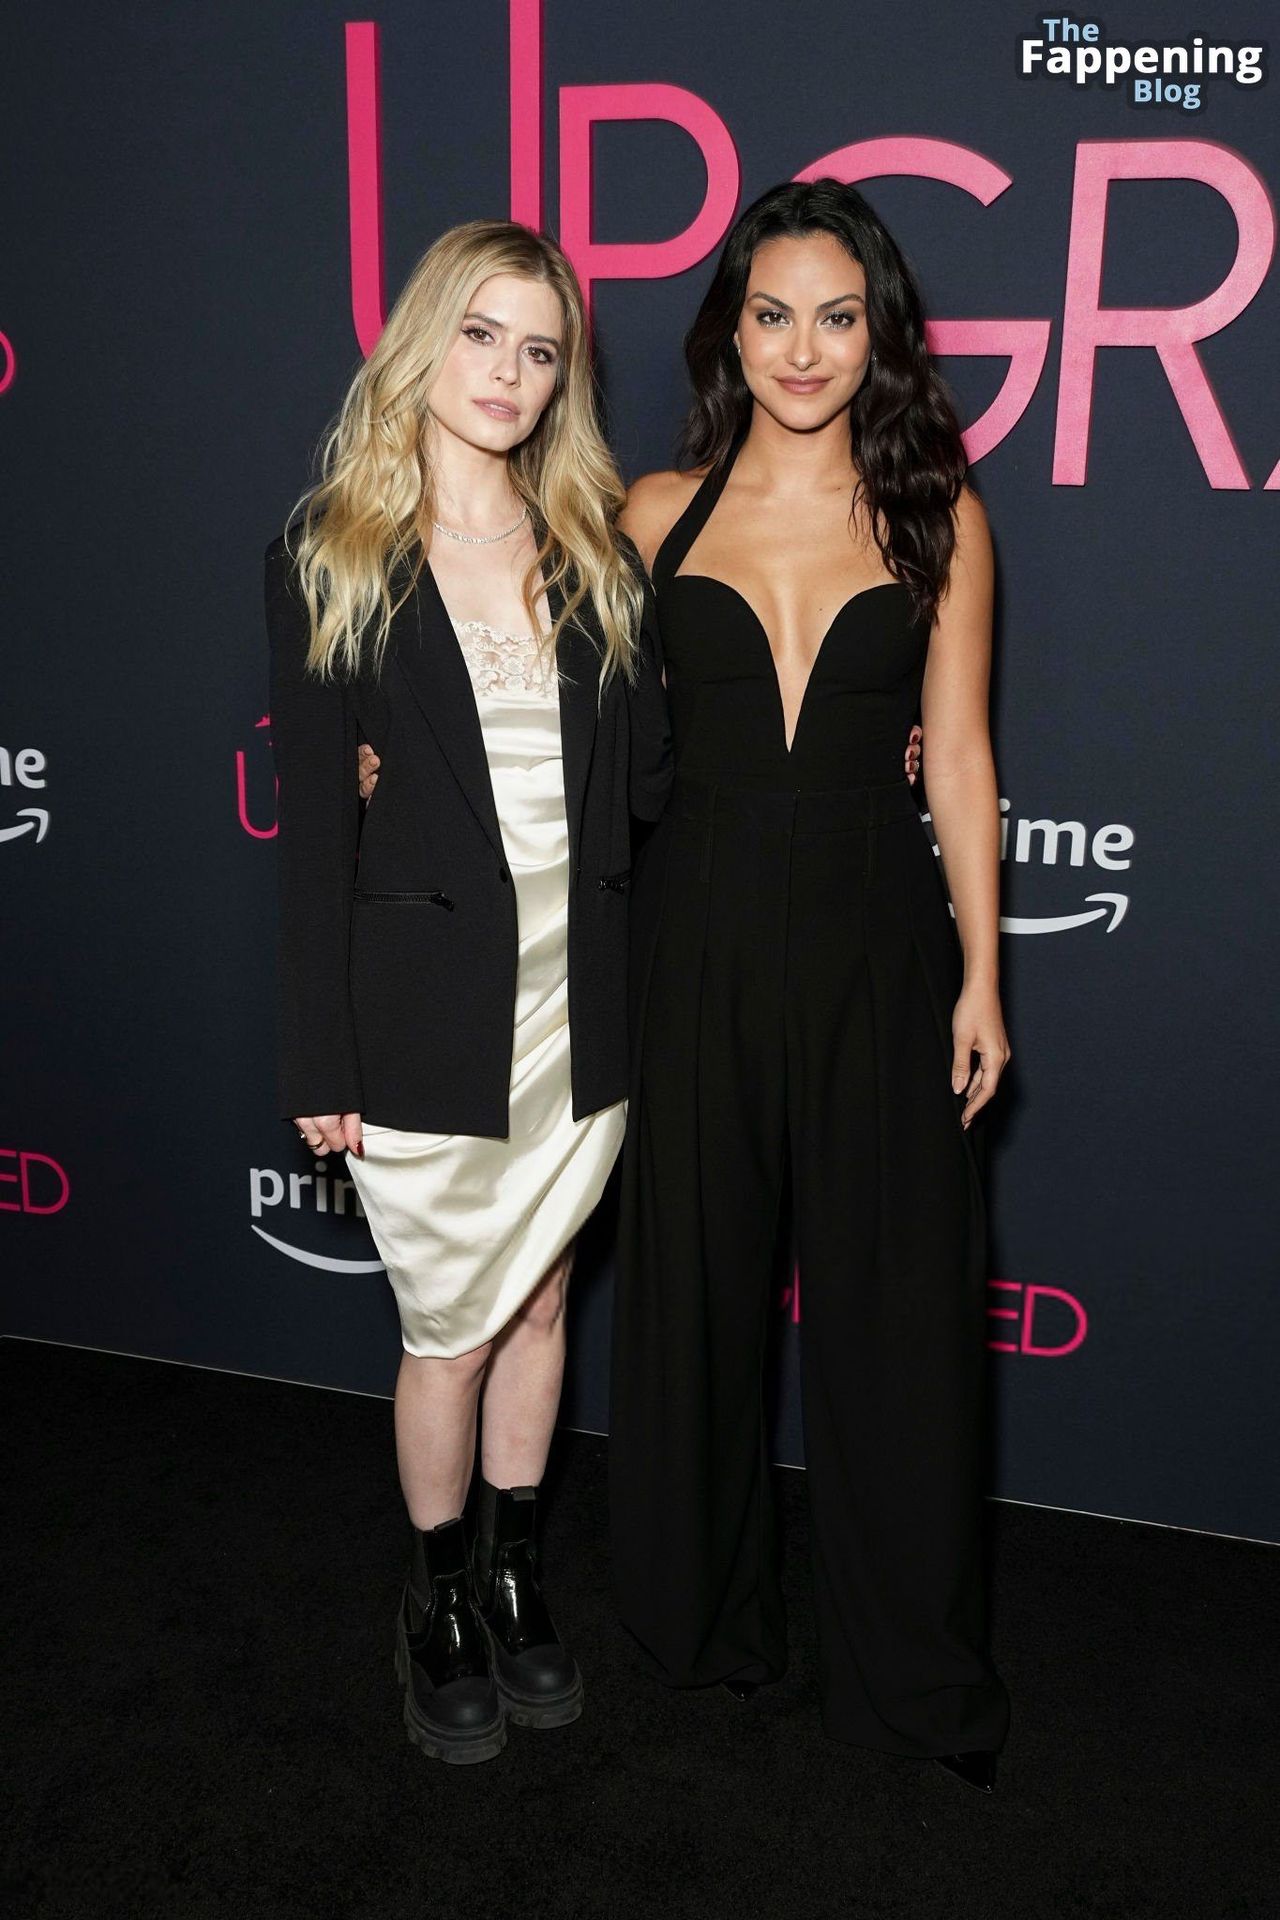 camila-mendes-upgraded-screening-cleavage-low-cut-dress-5-thefappeningblog.com_.jpg